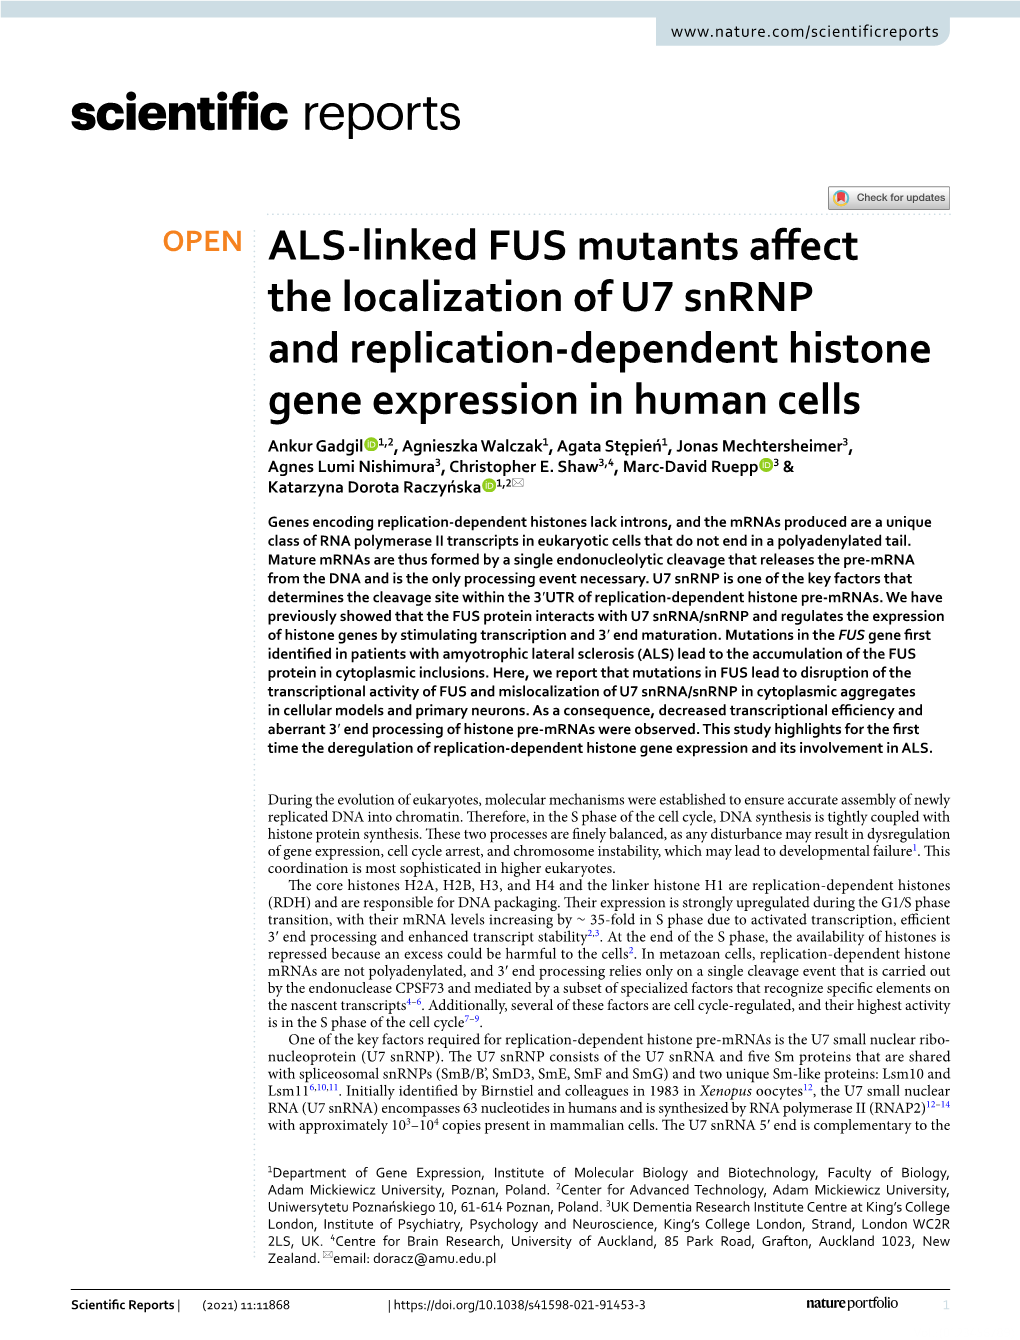 ALS-Linked FUS Mutants Affect the Localization of U7 Snrnp And